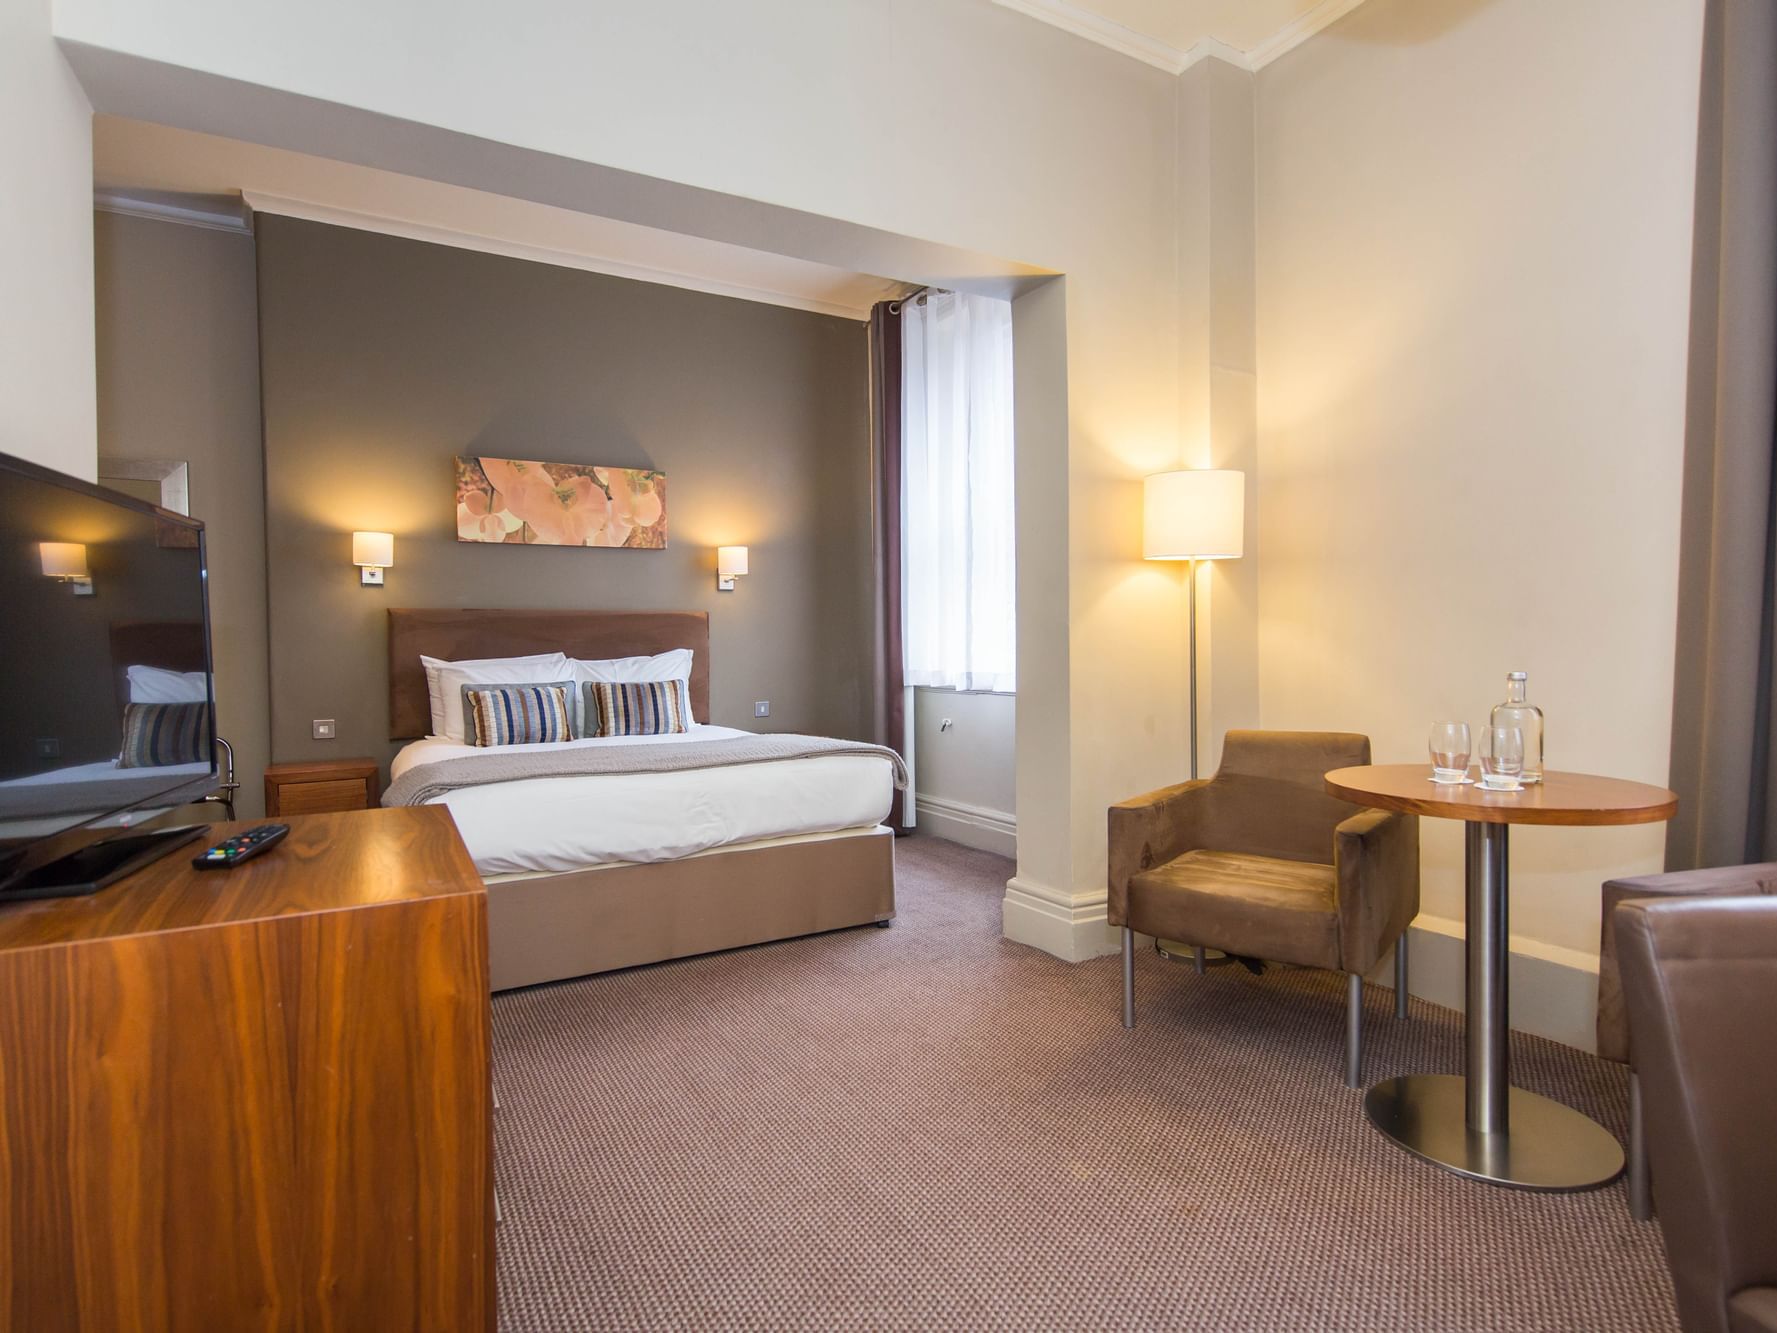 Superior Room with double bed, TV and space in The Met Hotel Leeds